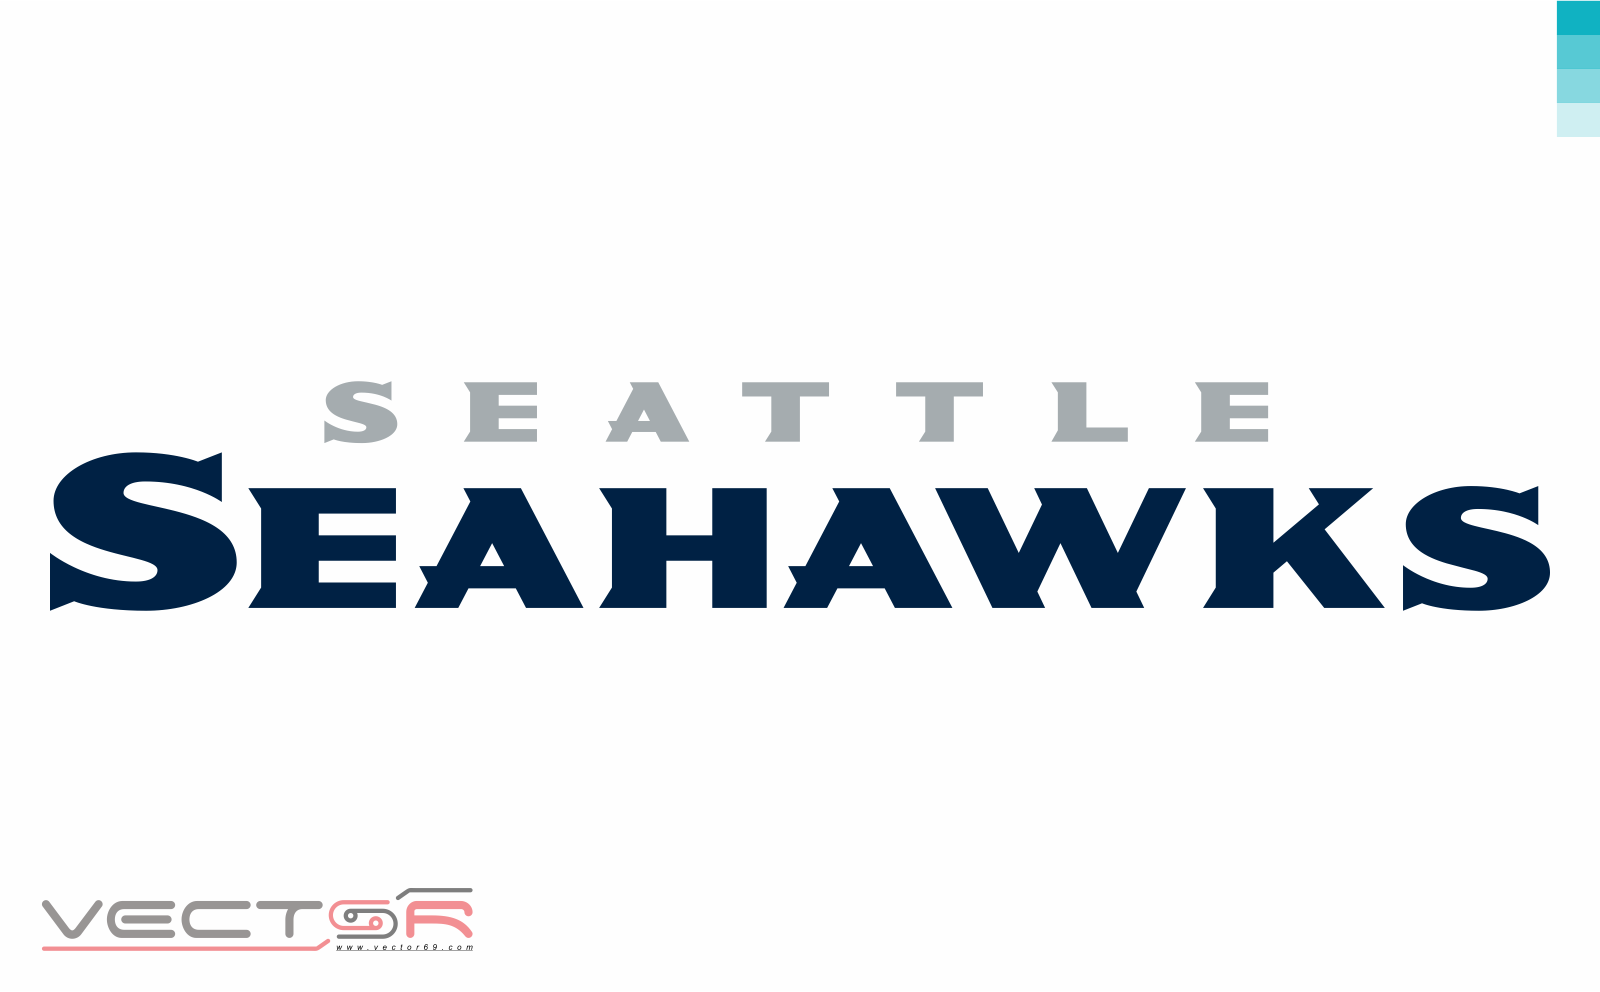 Seattle Seahawks Wordmark - Download Vector File SVG (Scalable Vector Graphics)